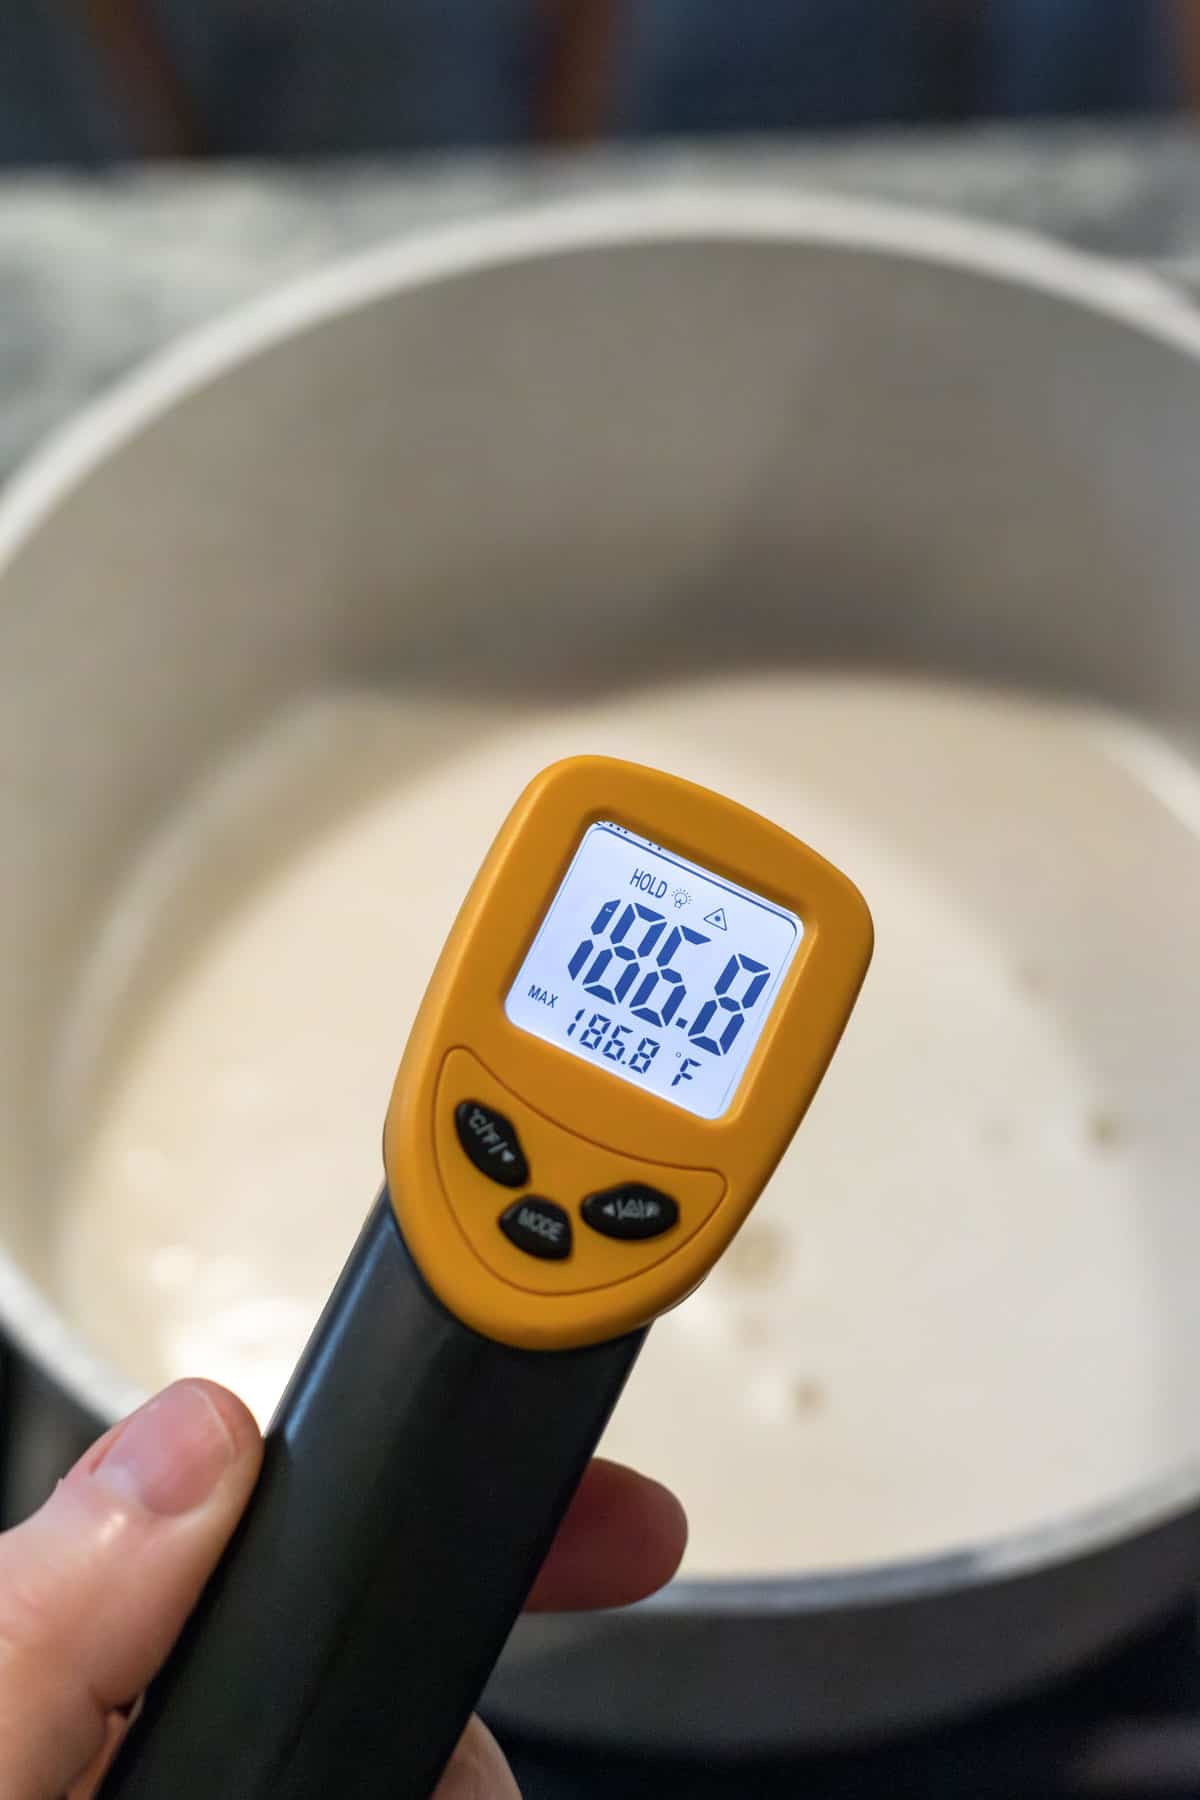 Using a thermometer to check the temperature of the creamer.